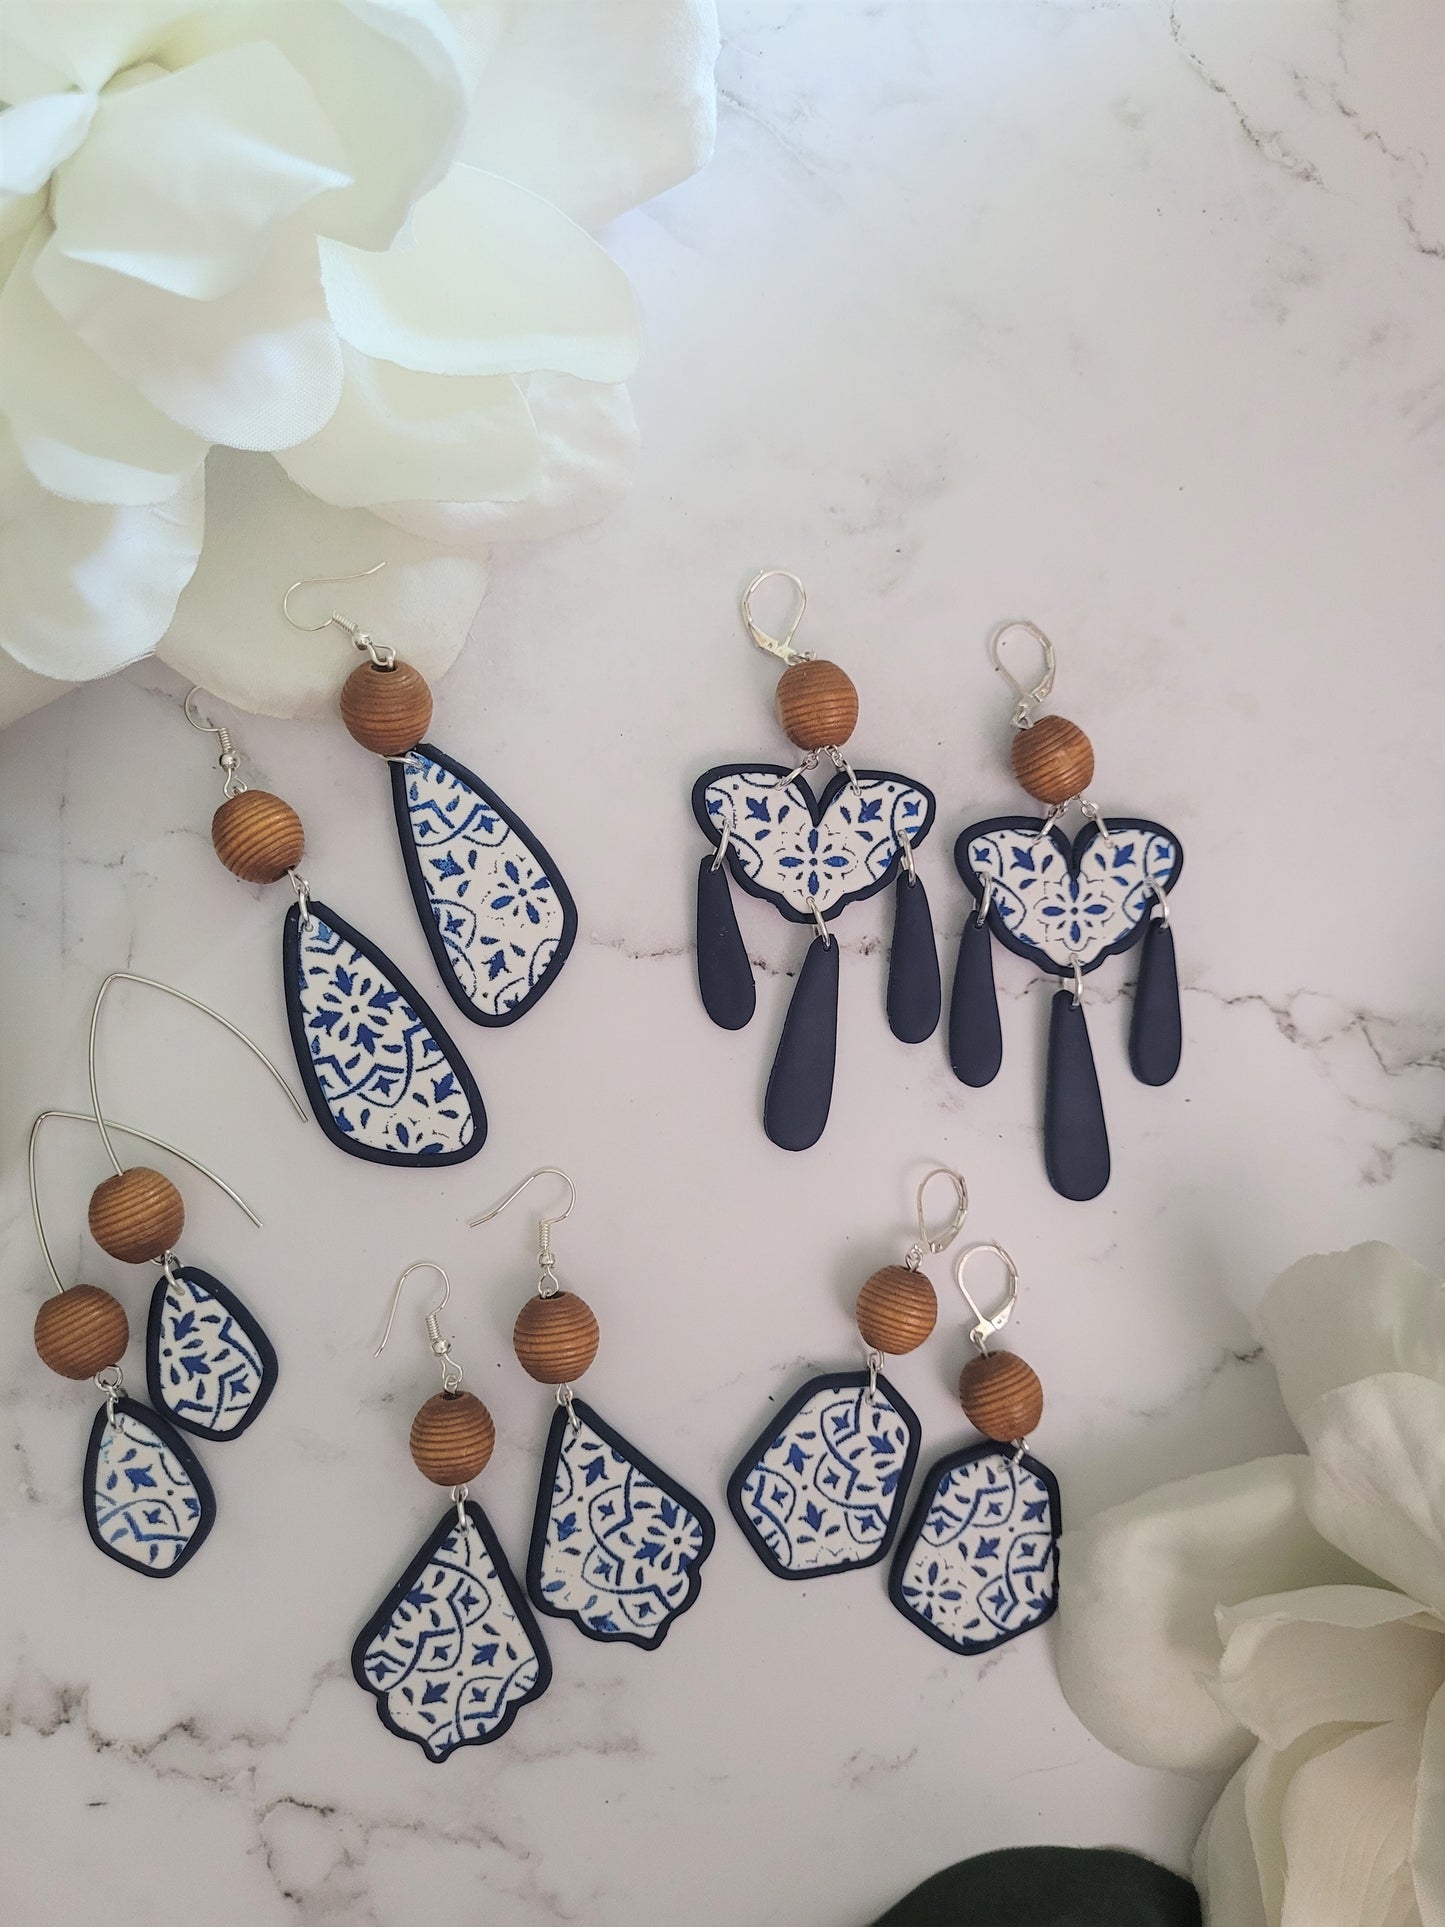 5 styles of polymer clay earrings on a white background. Earrings are white and navy with a tile print and wood bead. 